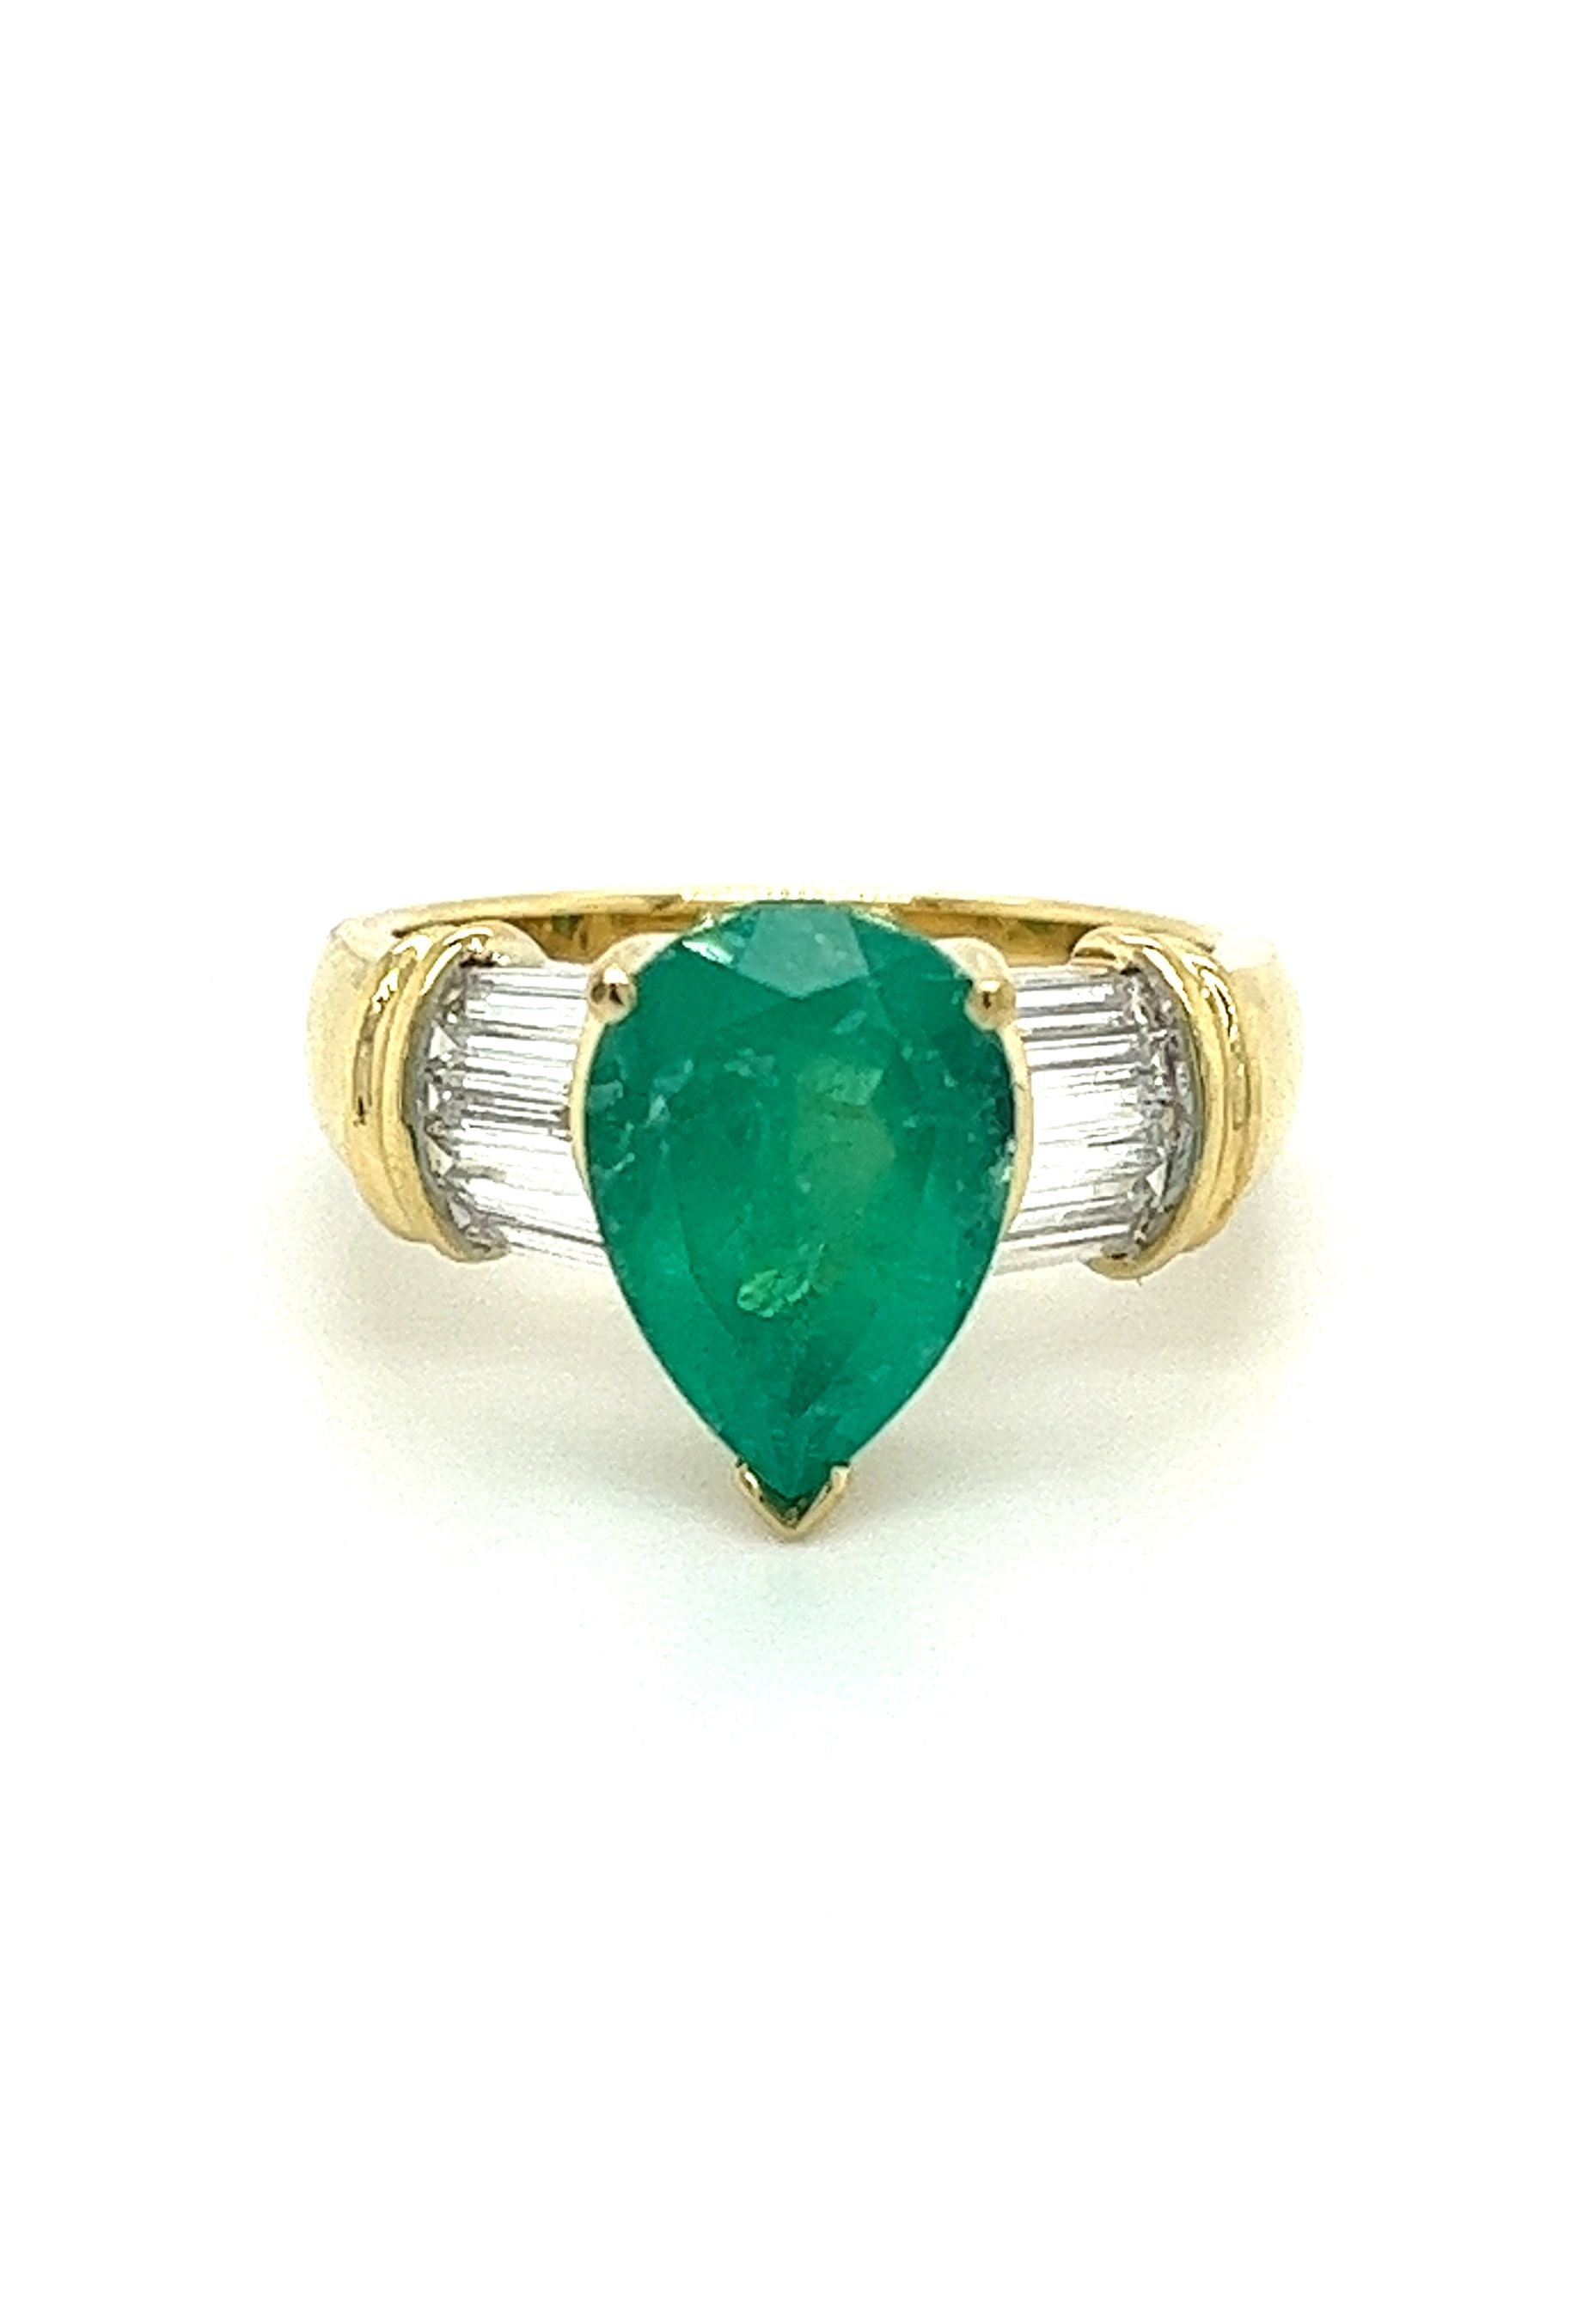 Natural-3_22-Carat-Pear-Cut-Colombian-Emerald-With-Baguette-Diamond-Side-Stone-Ring-Rings.jpg